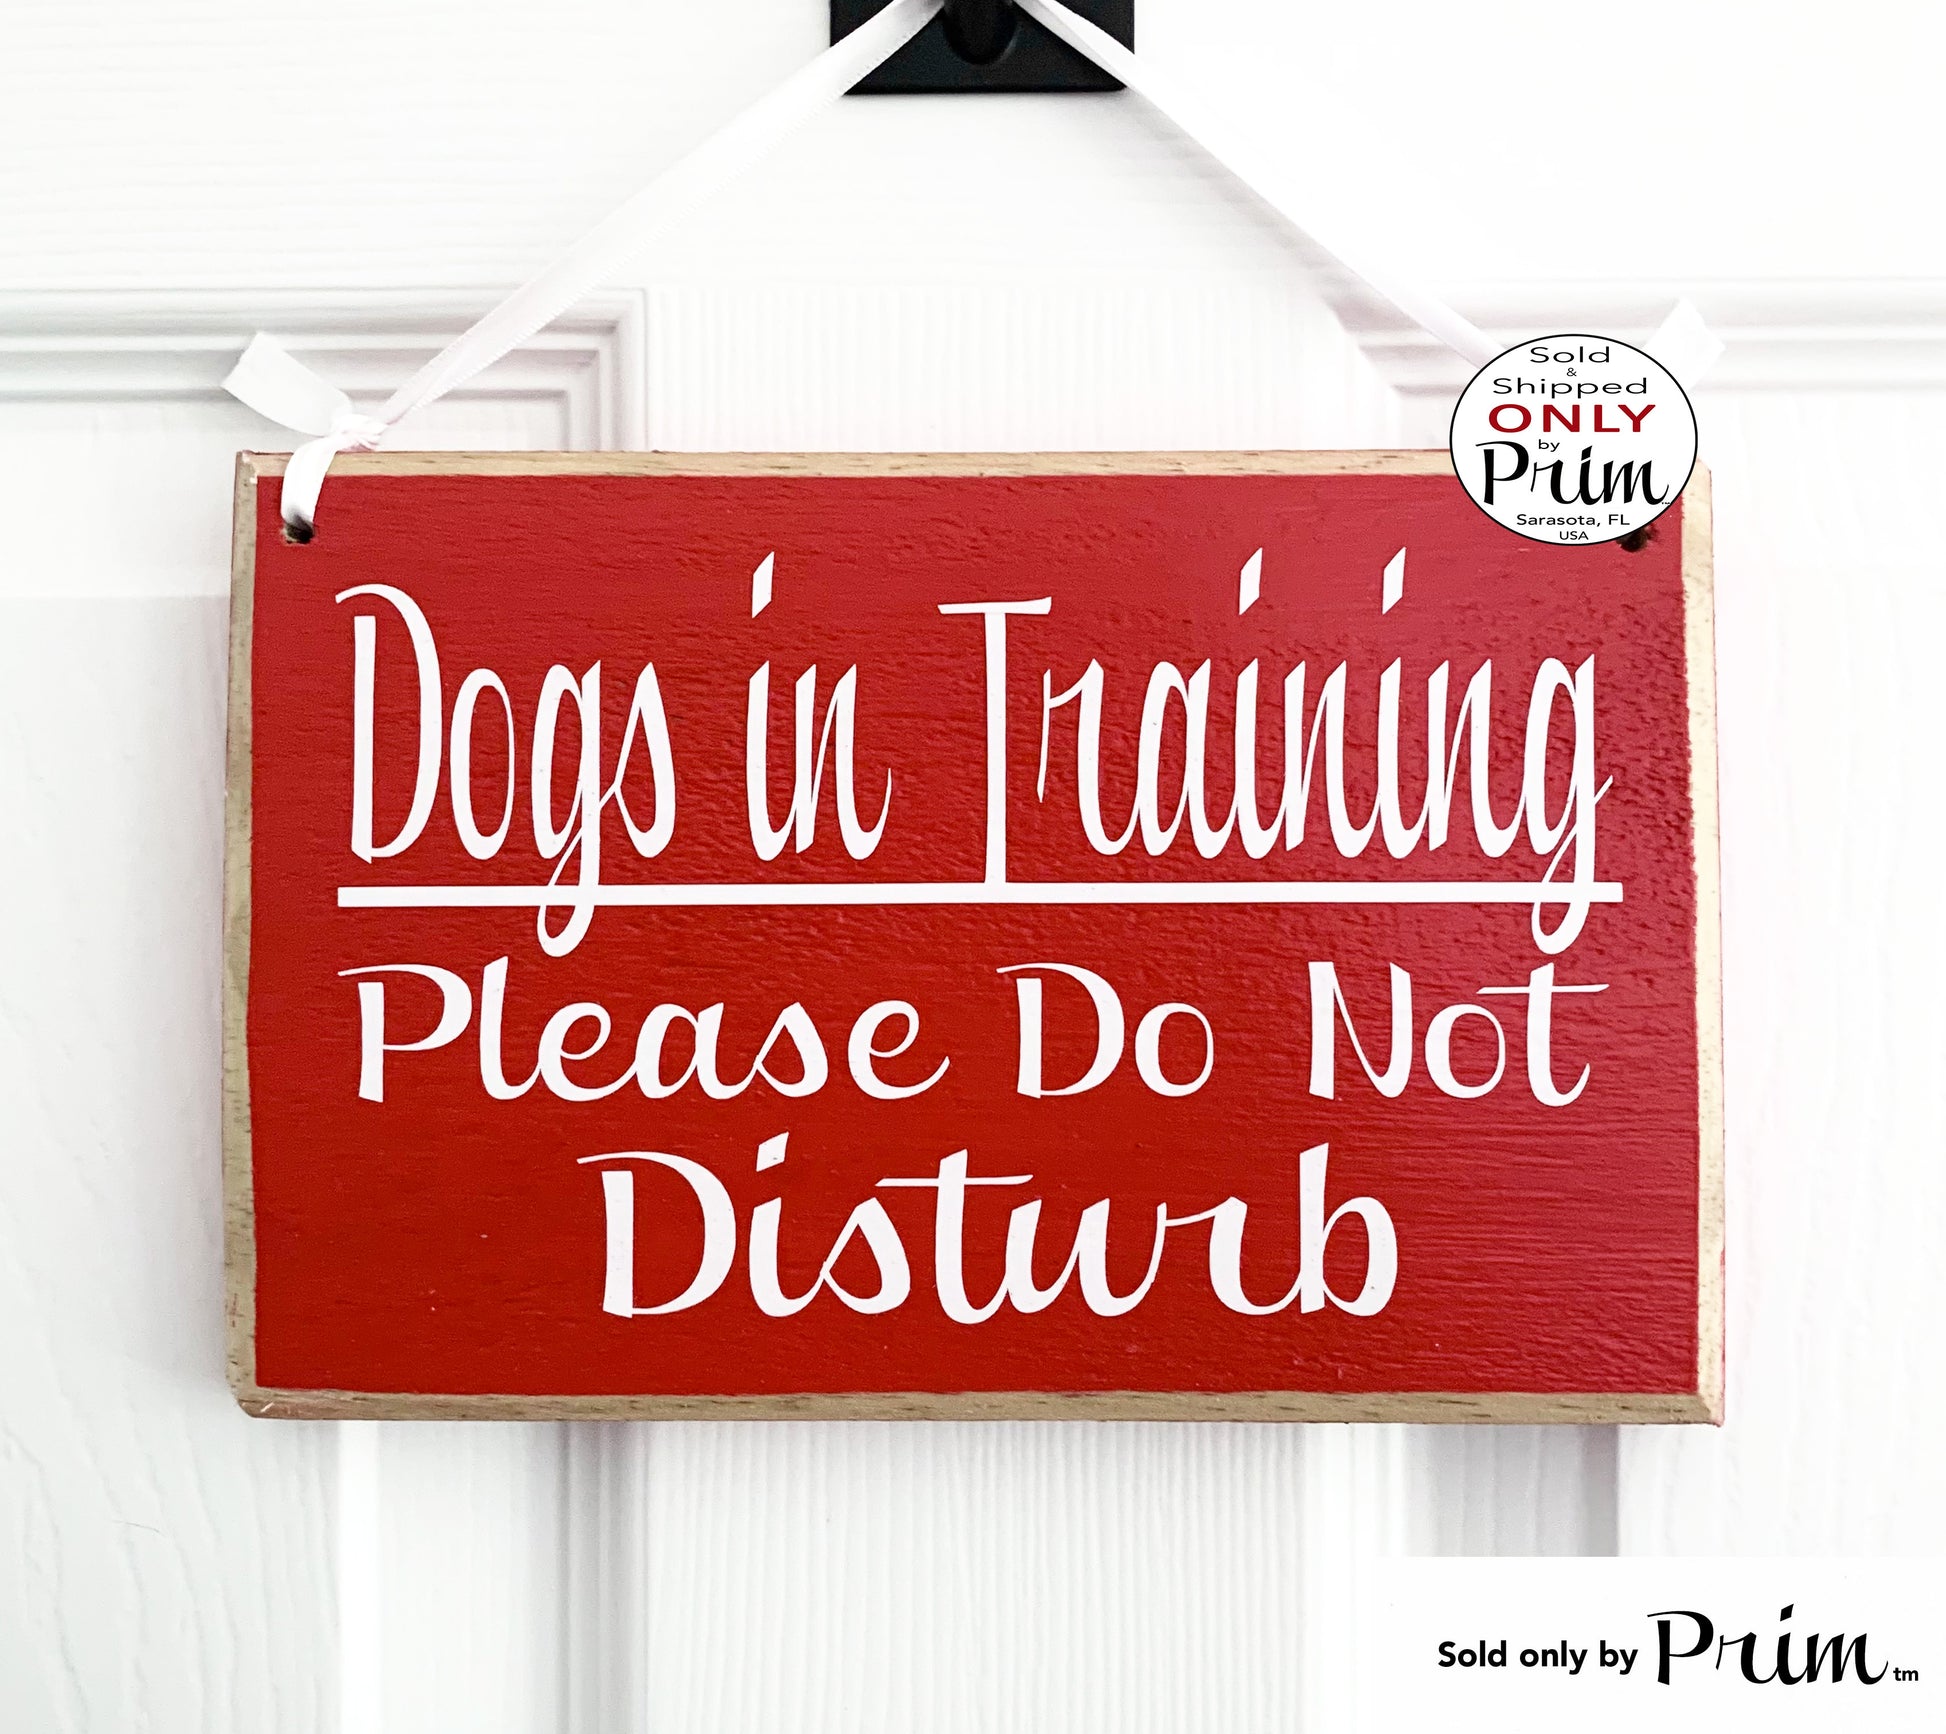 Designs by Prim 8x6 Dogs In Training Please Do Not Disturb Custom Wood Sign In Session K9 School Progress Therapy Class Obedience Puppy Boot Camp Door Plaque